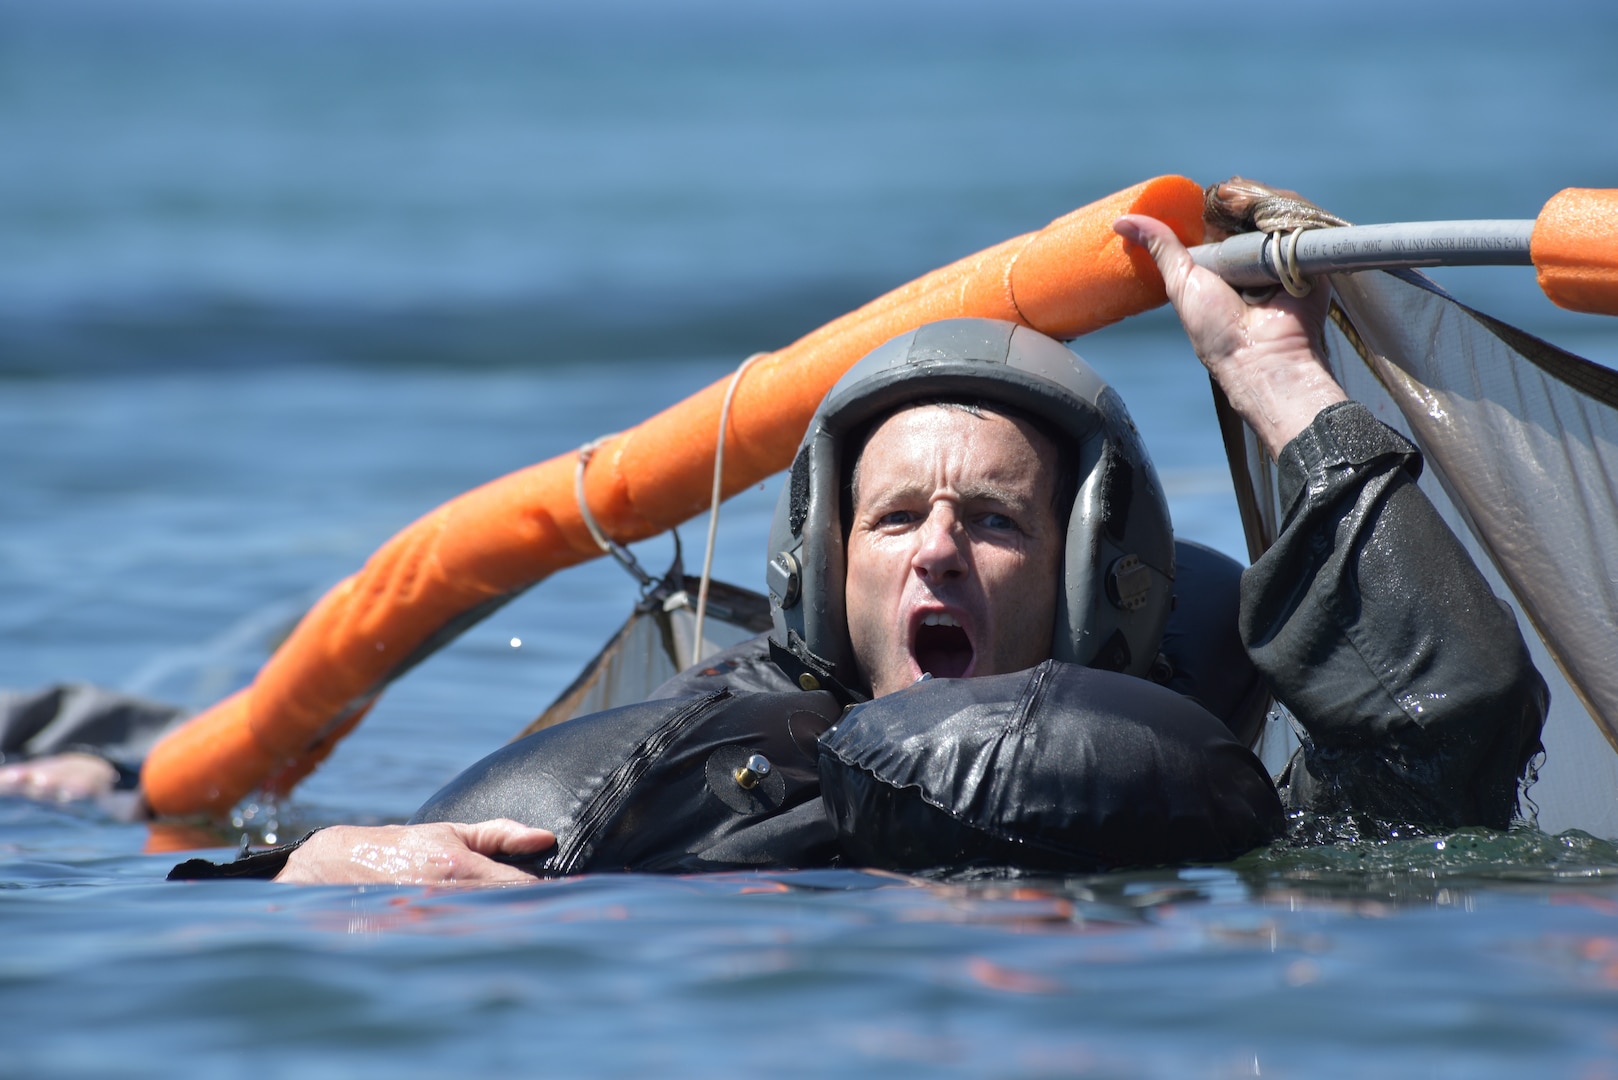 U.S. Air Force Lt. Col. Kedric Osborne, an F-15C Instructor Pilot at the 173rd Fighter Wing, takes a deep breath before submerging beneath a floating parachute canopy during water survival training at Cultus Lake, Oregon, July 25, 2019.